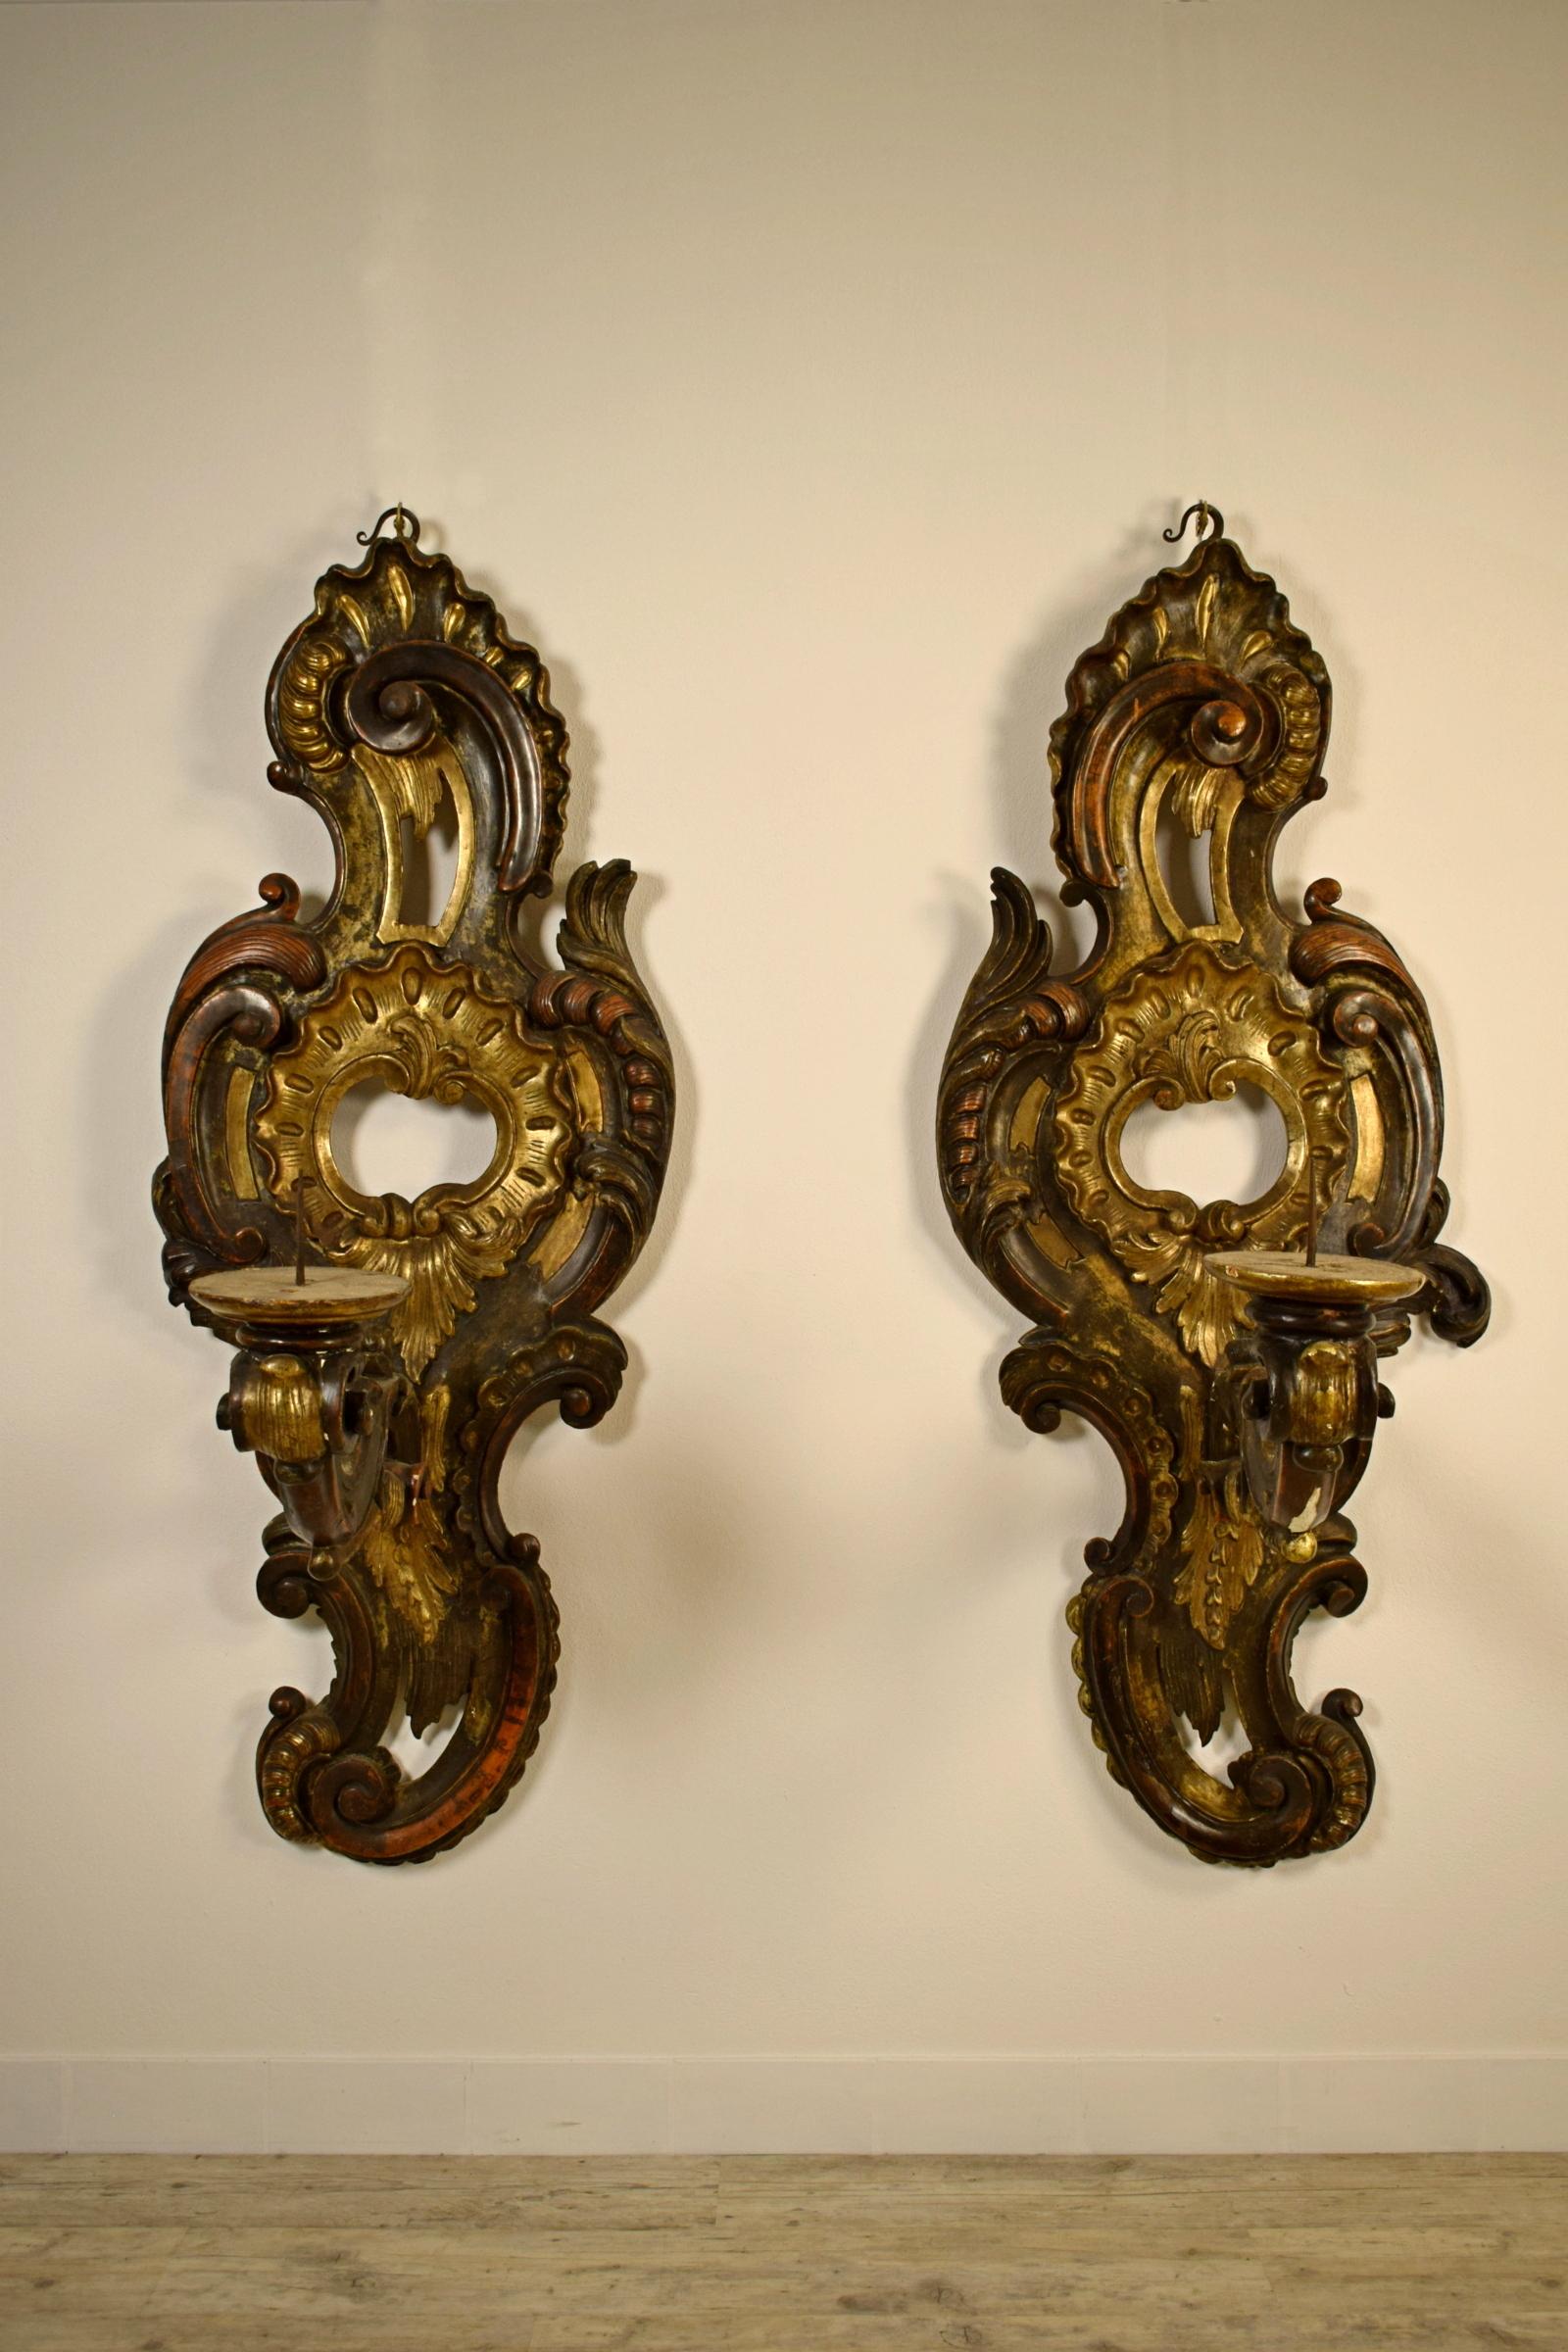 18th century, pair of large Italian carved and gilded wood applique
The couple of wall lamps, made in the first half of the 18th century in carved and gilded wood, is of Venetian area (north Italy). The valuable carving is asymmetrical and the wall